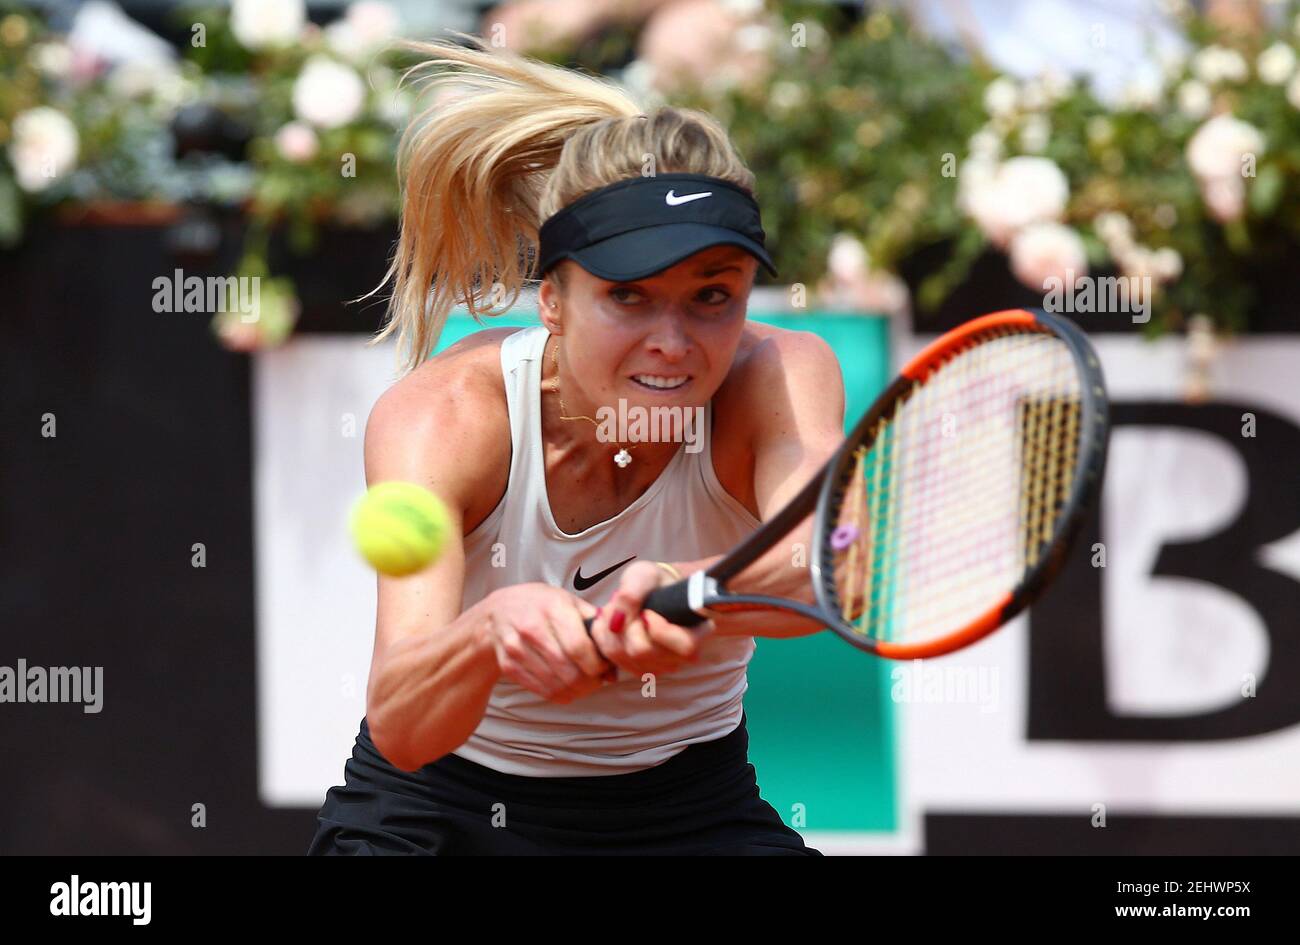 Tennis - WTA Premier 5 - Italian Open - Foro Italico, Rome, Italy - May 18, 2018   Ukraine's Elina Svitolina in action during her quarter final match against Germany's Angelique Kerber   REUTERS/Alessandro Bianchi Stock Photo